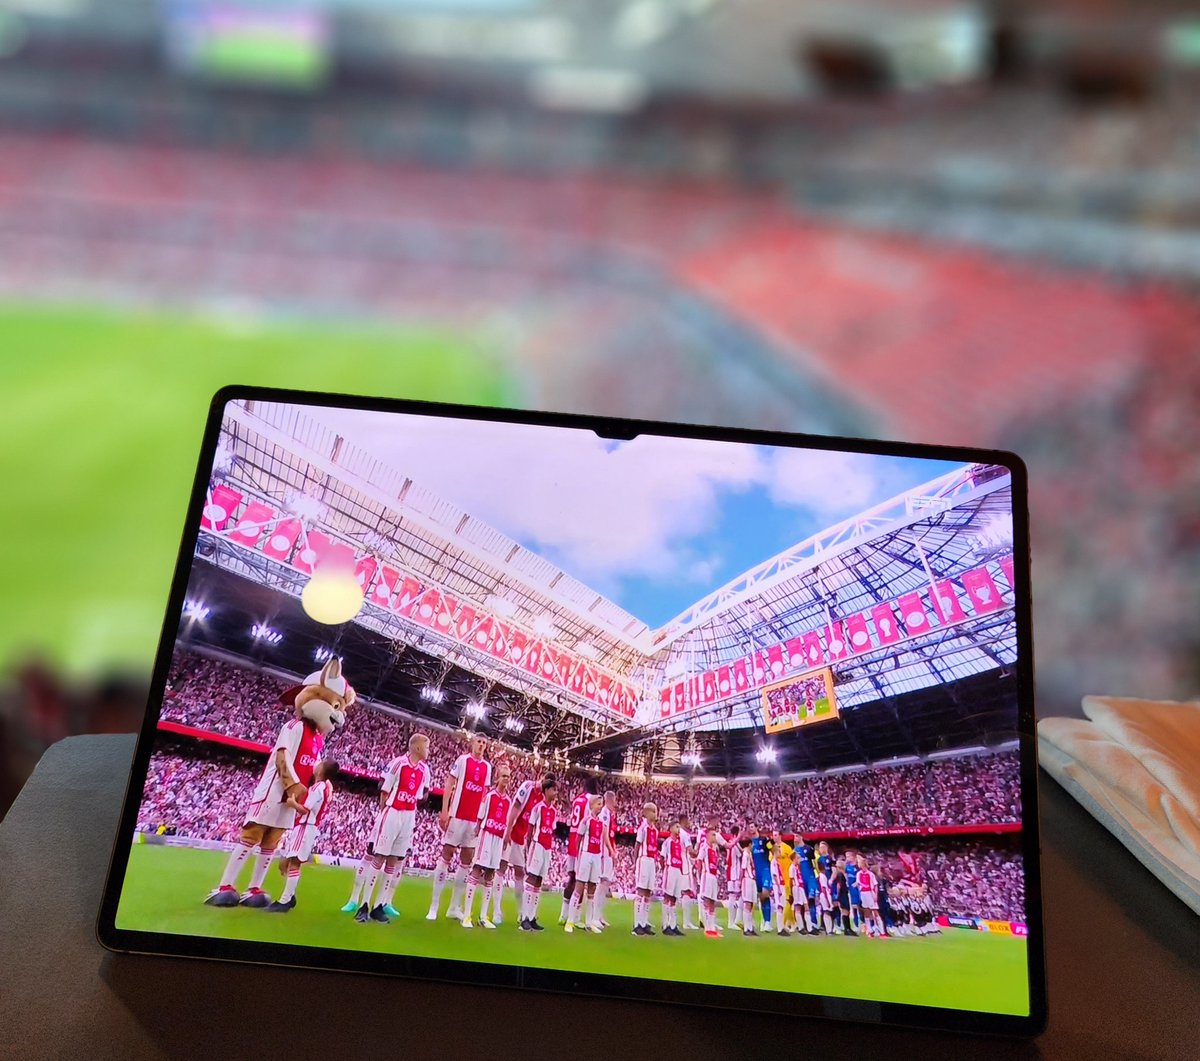 I am disappointed to miss the season opening match of @AFCAjax, but I had a great day with #AWS customers diving into the tech we built with the @Bundesliga_EN (and still secretly watch Ajax in the @FCBayern stadium :-)